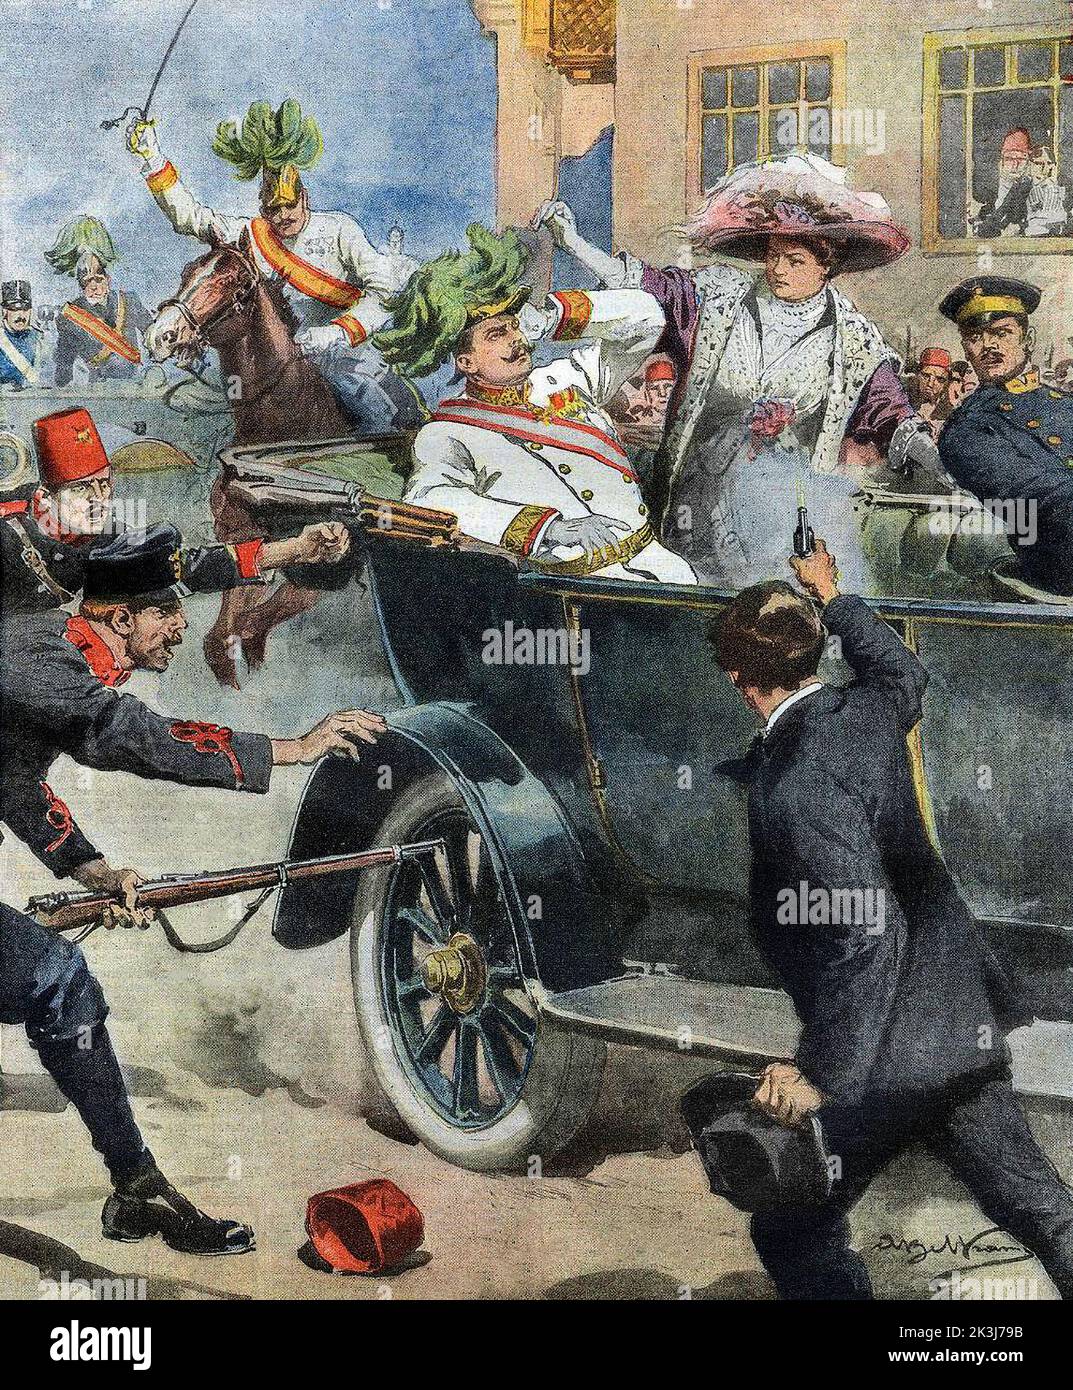 An illustration from July 1914 by Achille Beltrame of the  event widely acknowledged to have sparked the outbreak of World War I. Archduke Franz Ferdinand, nephew of Emperor Franz Josef and heir to the Austro-Hungarian Empire, shot to death along with his wife by 19-year-old Gavrilo Princip, a Serbian nationalist in Sarajevo, Bosnia, on June 28, 1914. Stock Photo